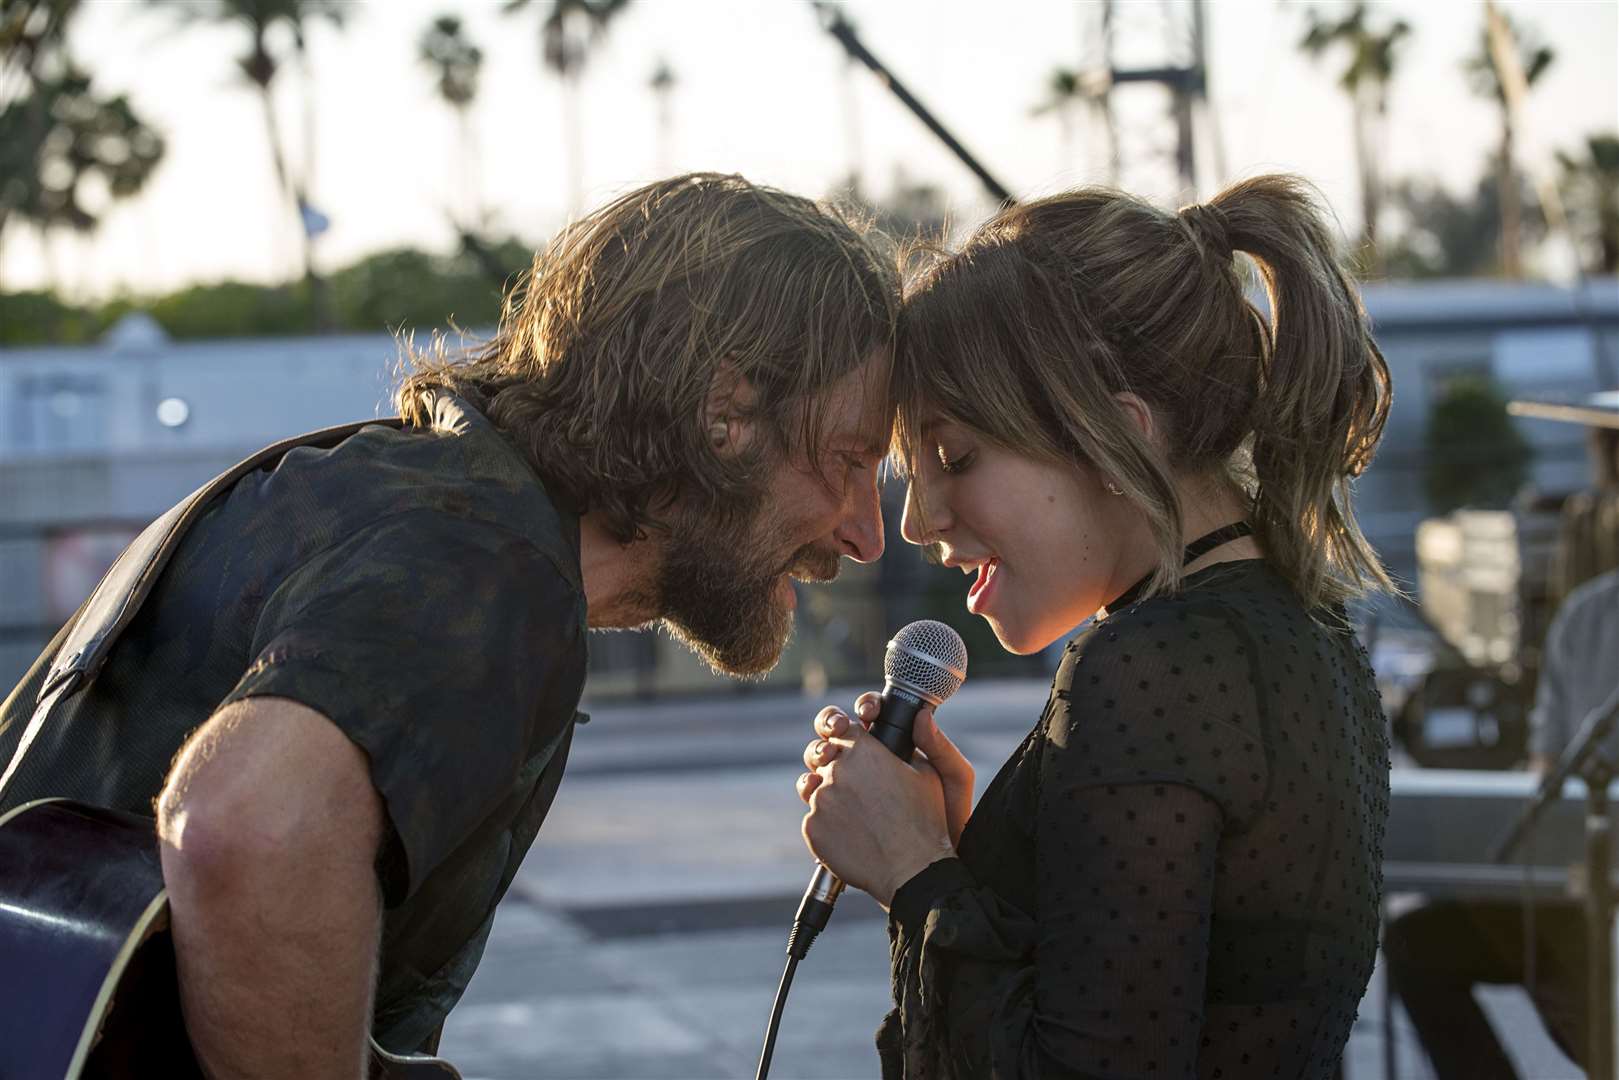 Bradley Cooper as Jackson Maine and Lady Gaga as Ally in A Star is Born Picture: Warner Bros. Entertainment Inc./Neal Preston